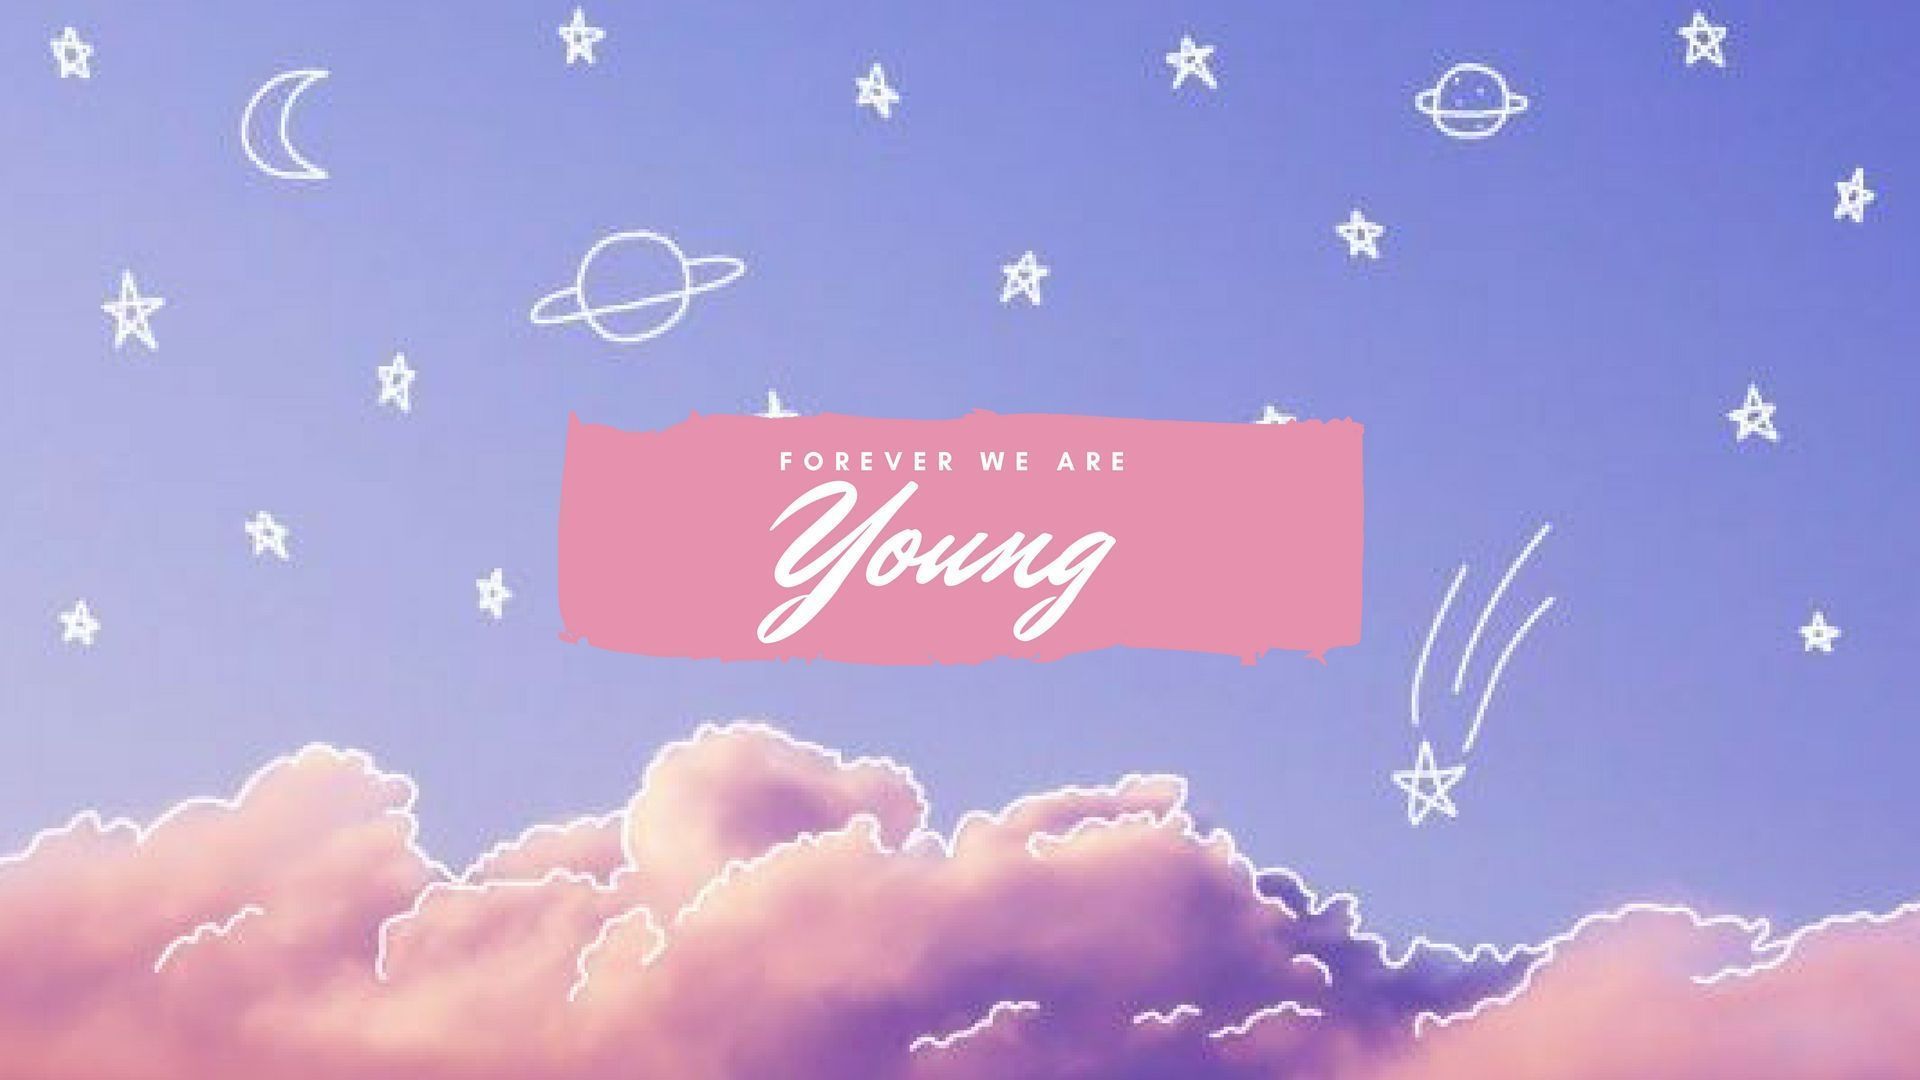 Forever, We Are Young. BTS BTS Wallpaper For Desktop Computer #BTS #Computerstechn. Bts Wallpaper Desktop, Bts Laptop Wallpaper, Aesthetic Desktop Wallpaper